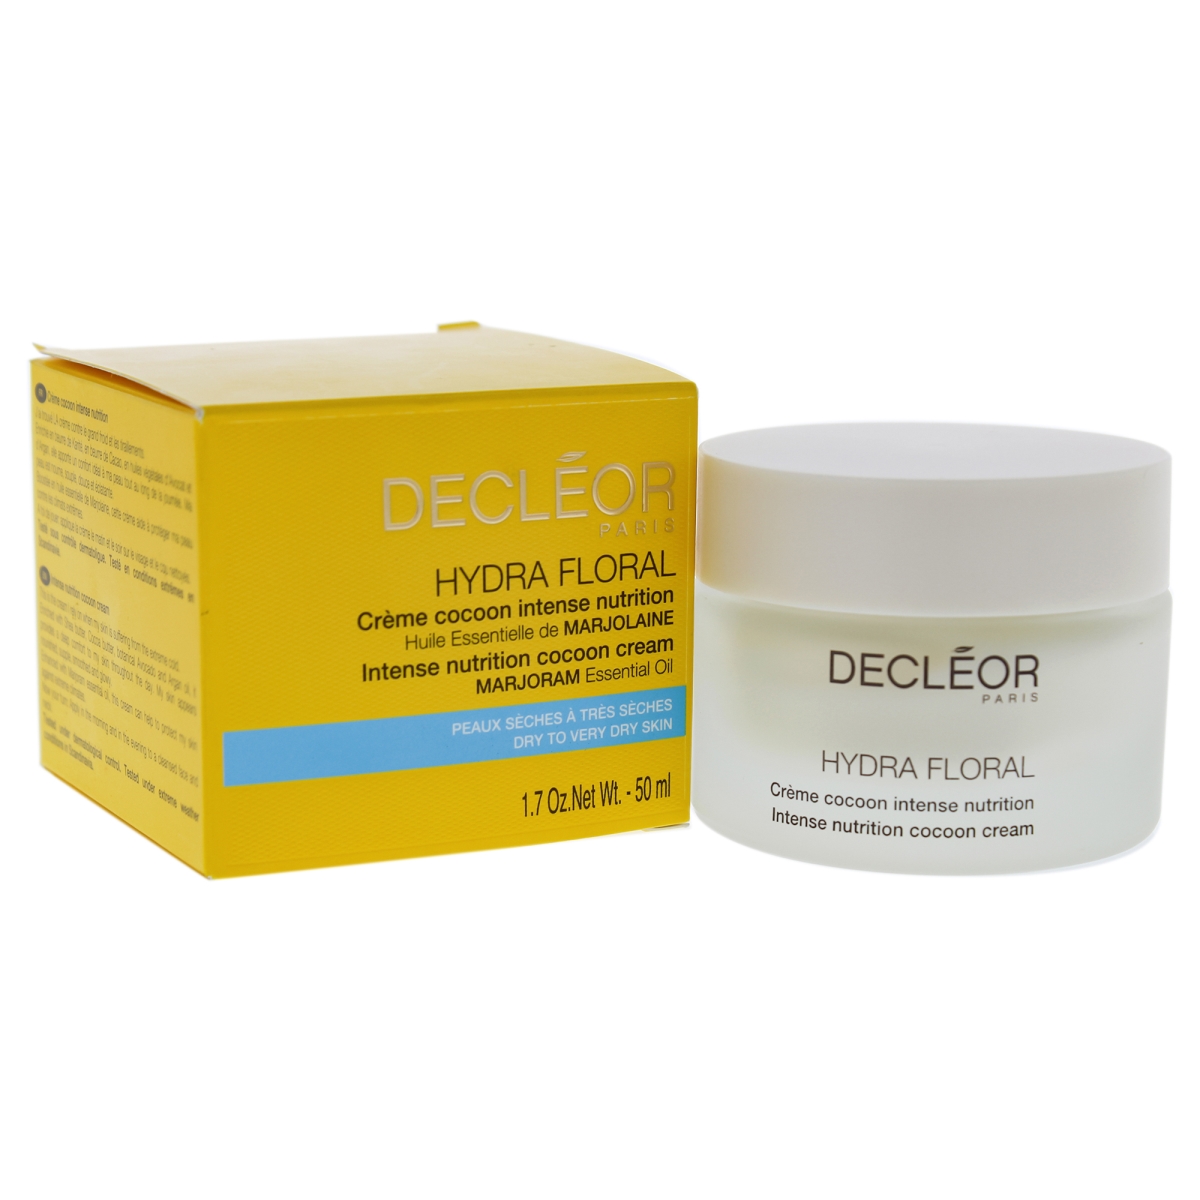 I0086453 Hydra Floral Intense Nutrition Cocoon Cream For Unisex - 1.7 Oz